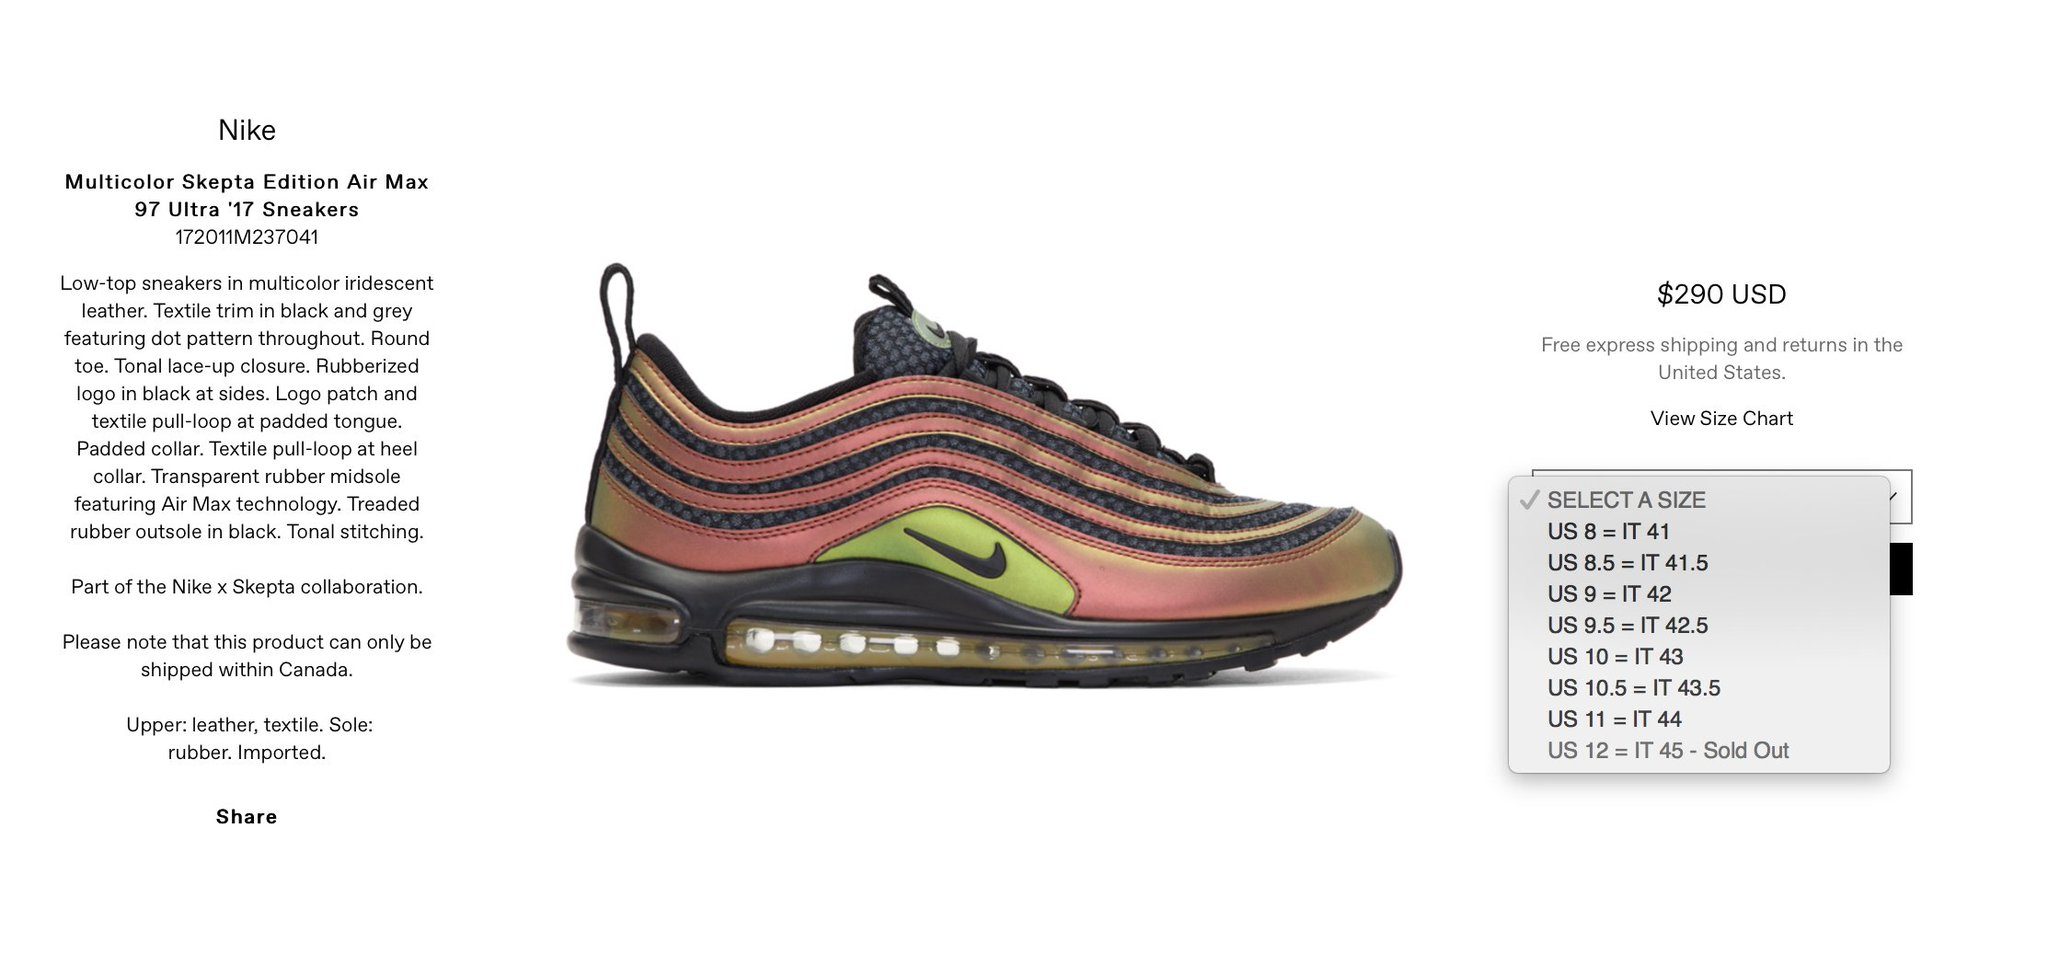 Icy Sole on Twitter: "#RESTOCK retail) SKEPTA x Air Max 97 Ultra LINK:https://t.co/cspEtyQTZd https://t.co/3OH1Mr7W7q" / Twitter